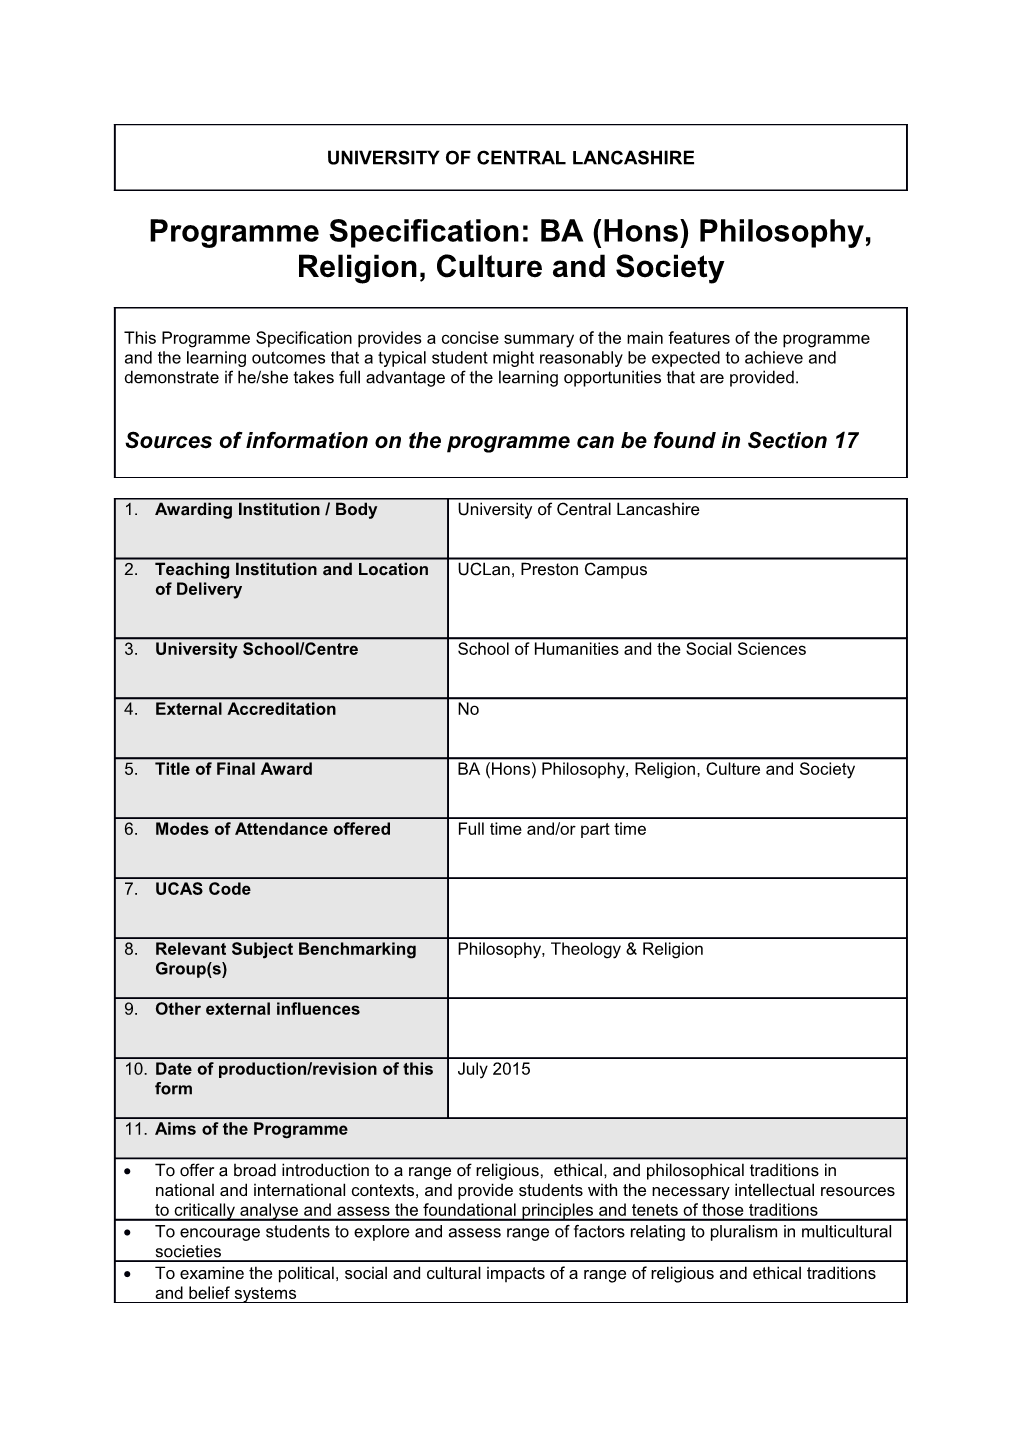 BA (Hons) Philosophy and Religion Culture and Society (Sept 2015)